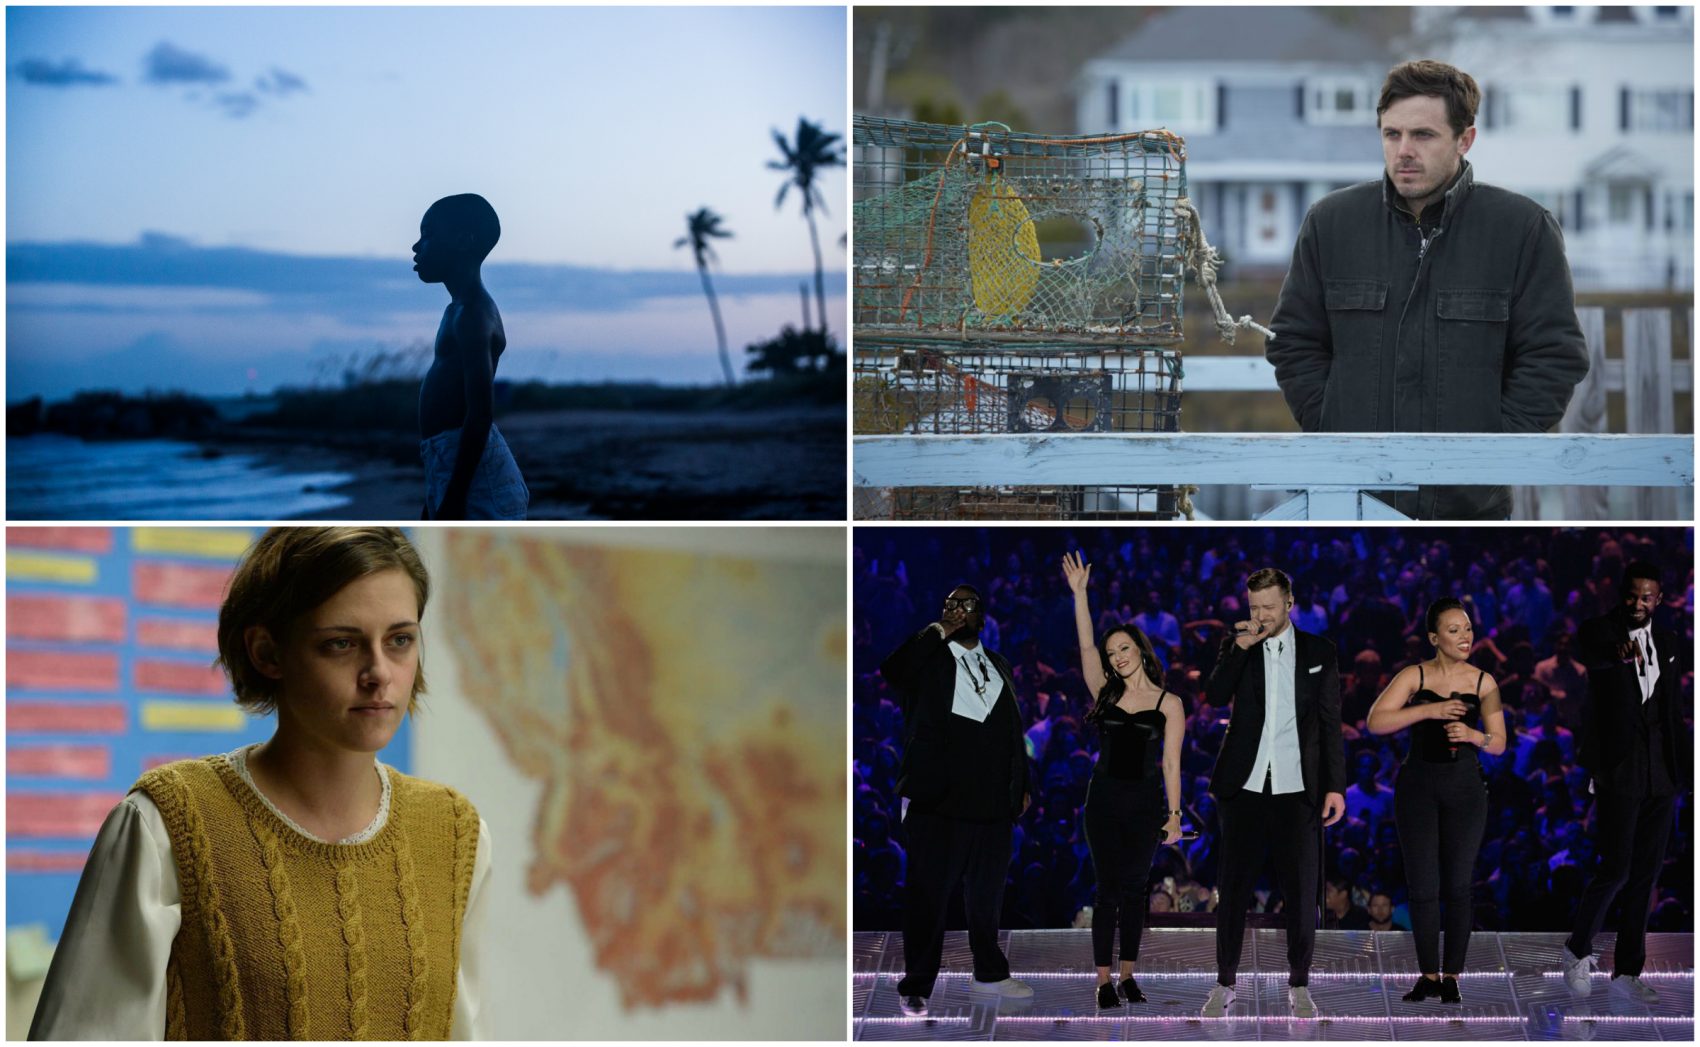 Scenes from &quot;Moonlight,&quot; &quot;Manchester by the Sea,&quot; &quot;Certain Women&quot; and &quot;Justin Timberlake + The Tennessee Kids.&quot; (Courtesy EPK, Amazon Studios, IFC Films and Netflix)